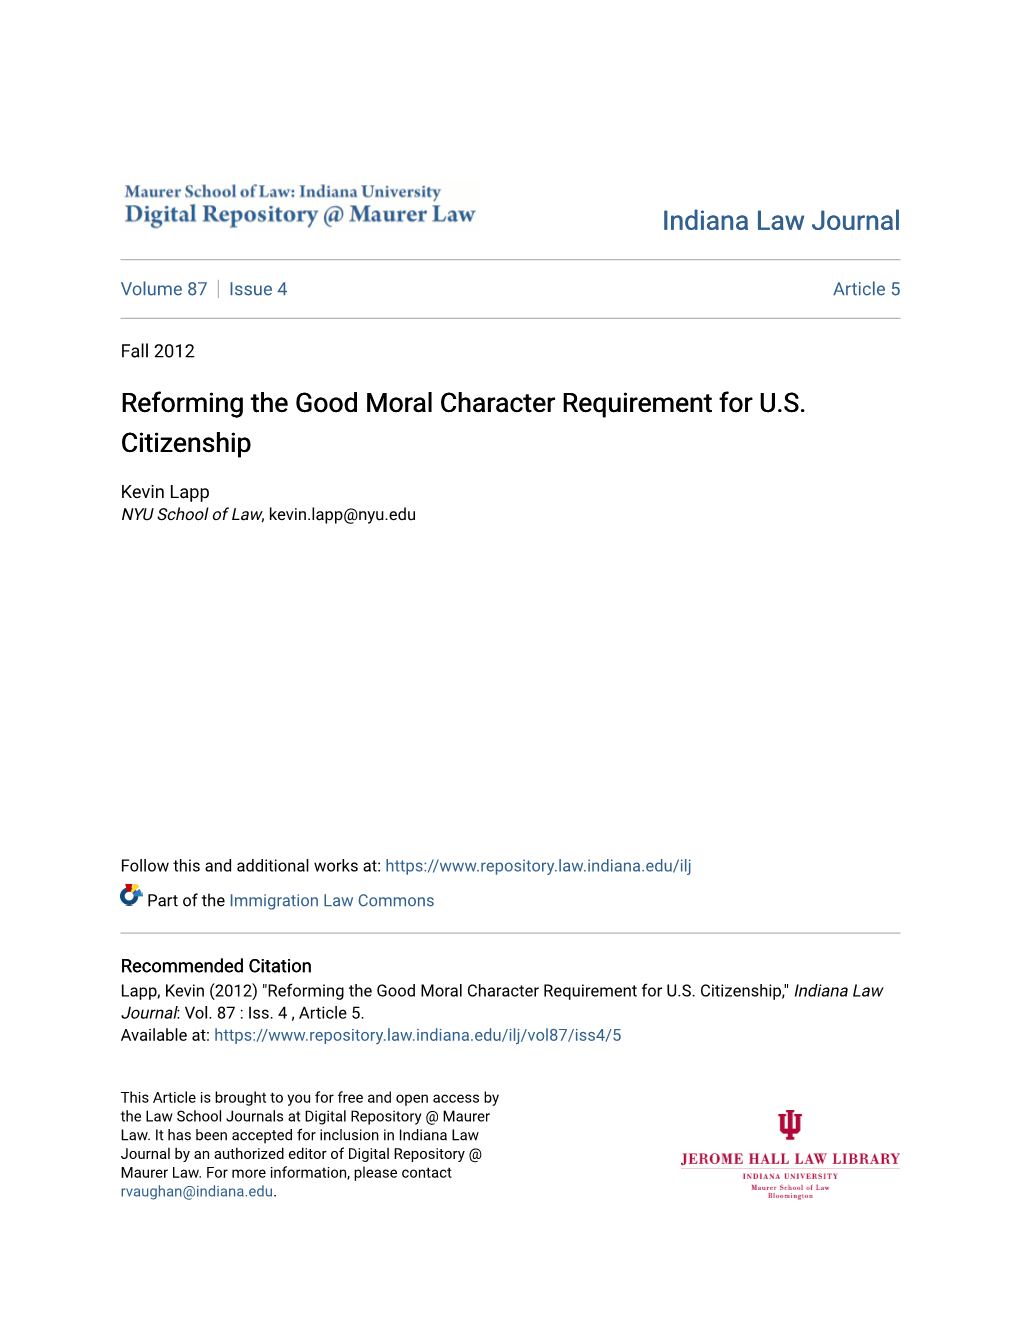 Reforming the Good Moral Character Requirement for U.S. Citizenship